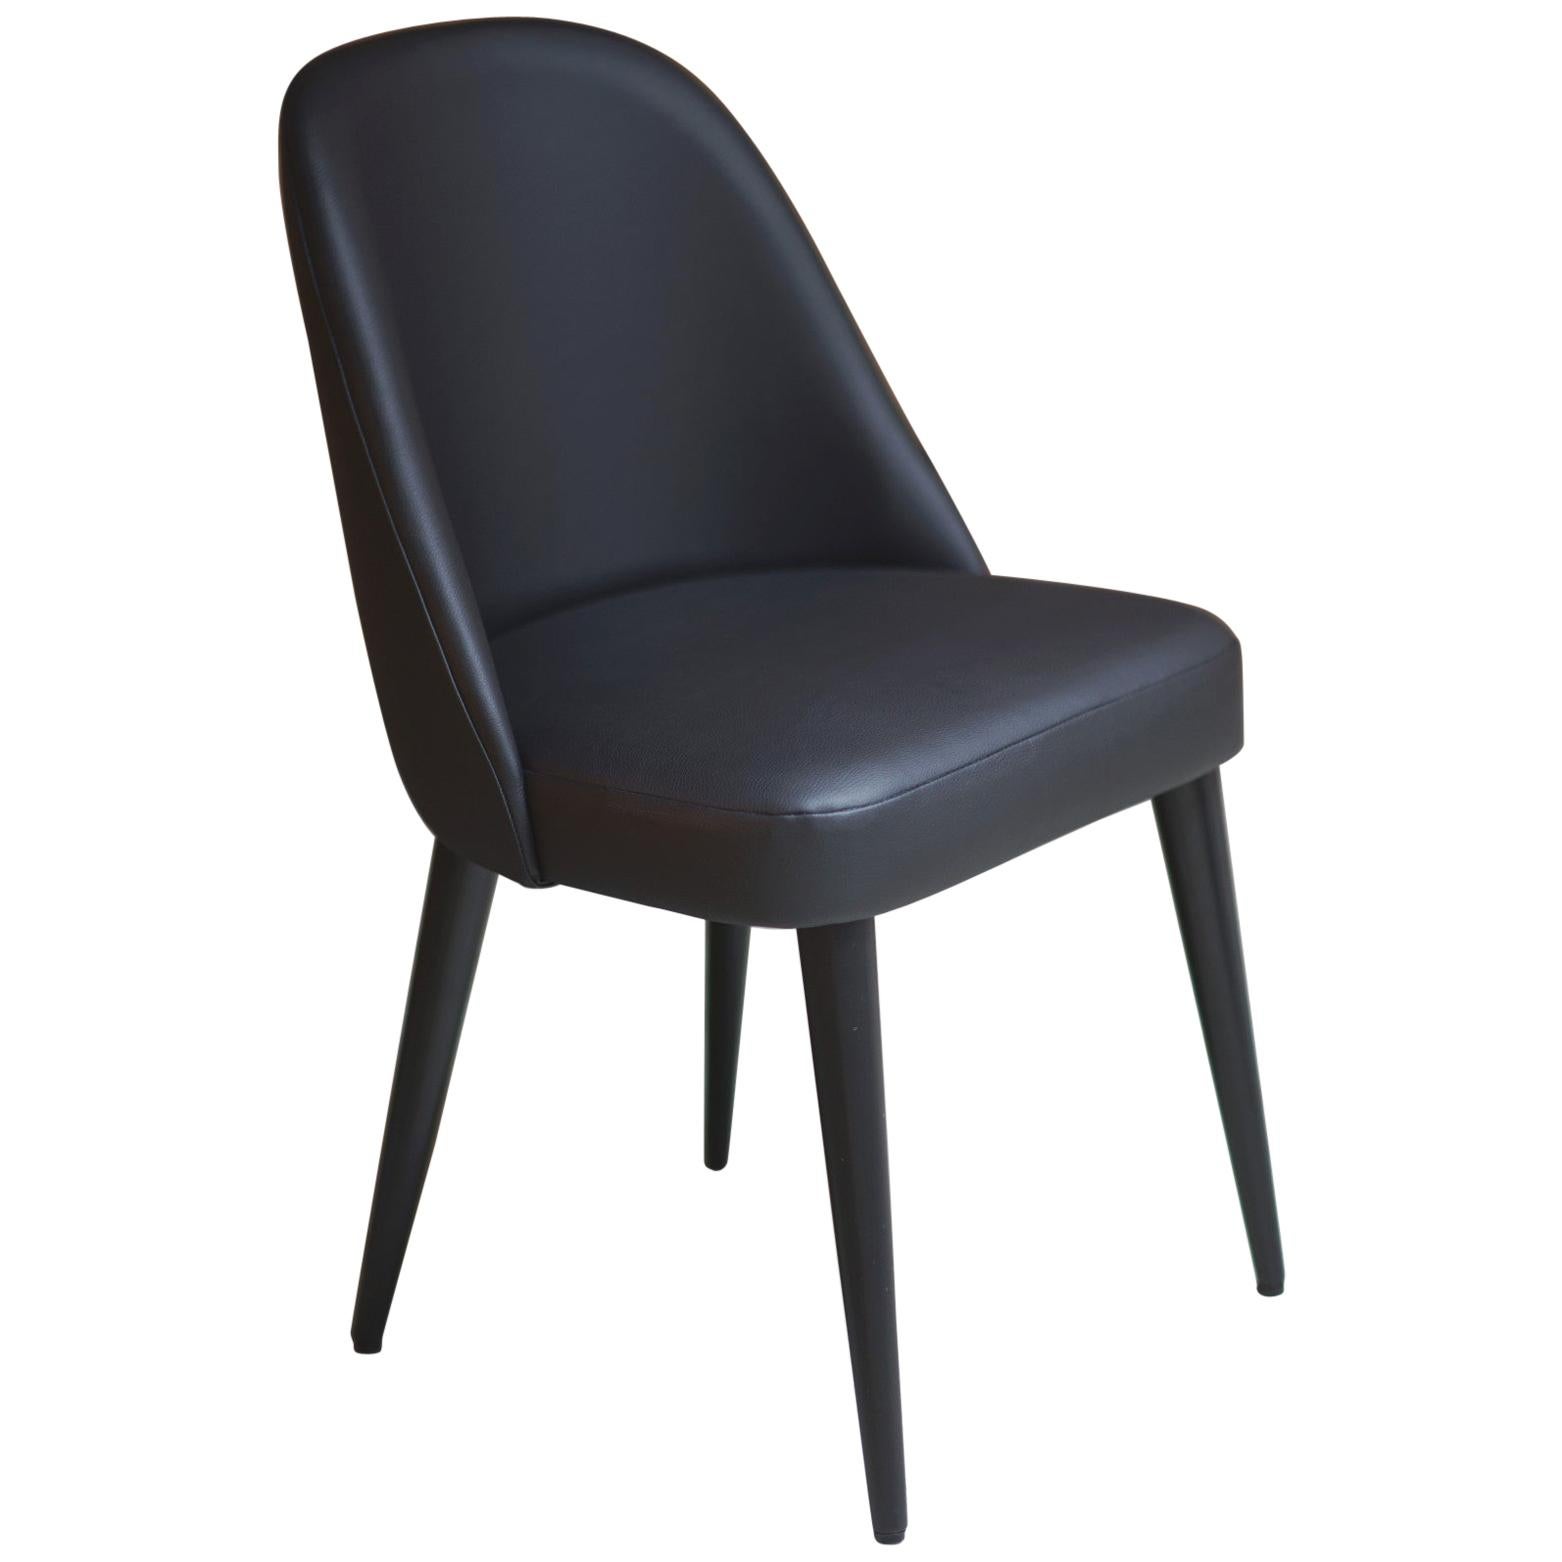 Modern Smokey Black Faux Leather Fabric Dining Chair with Oak Base Painted Black